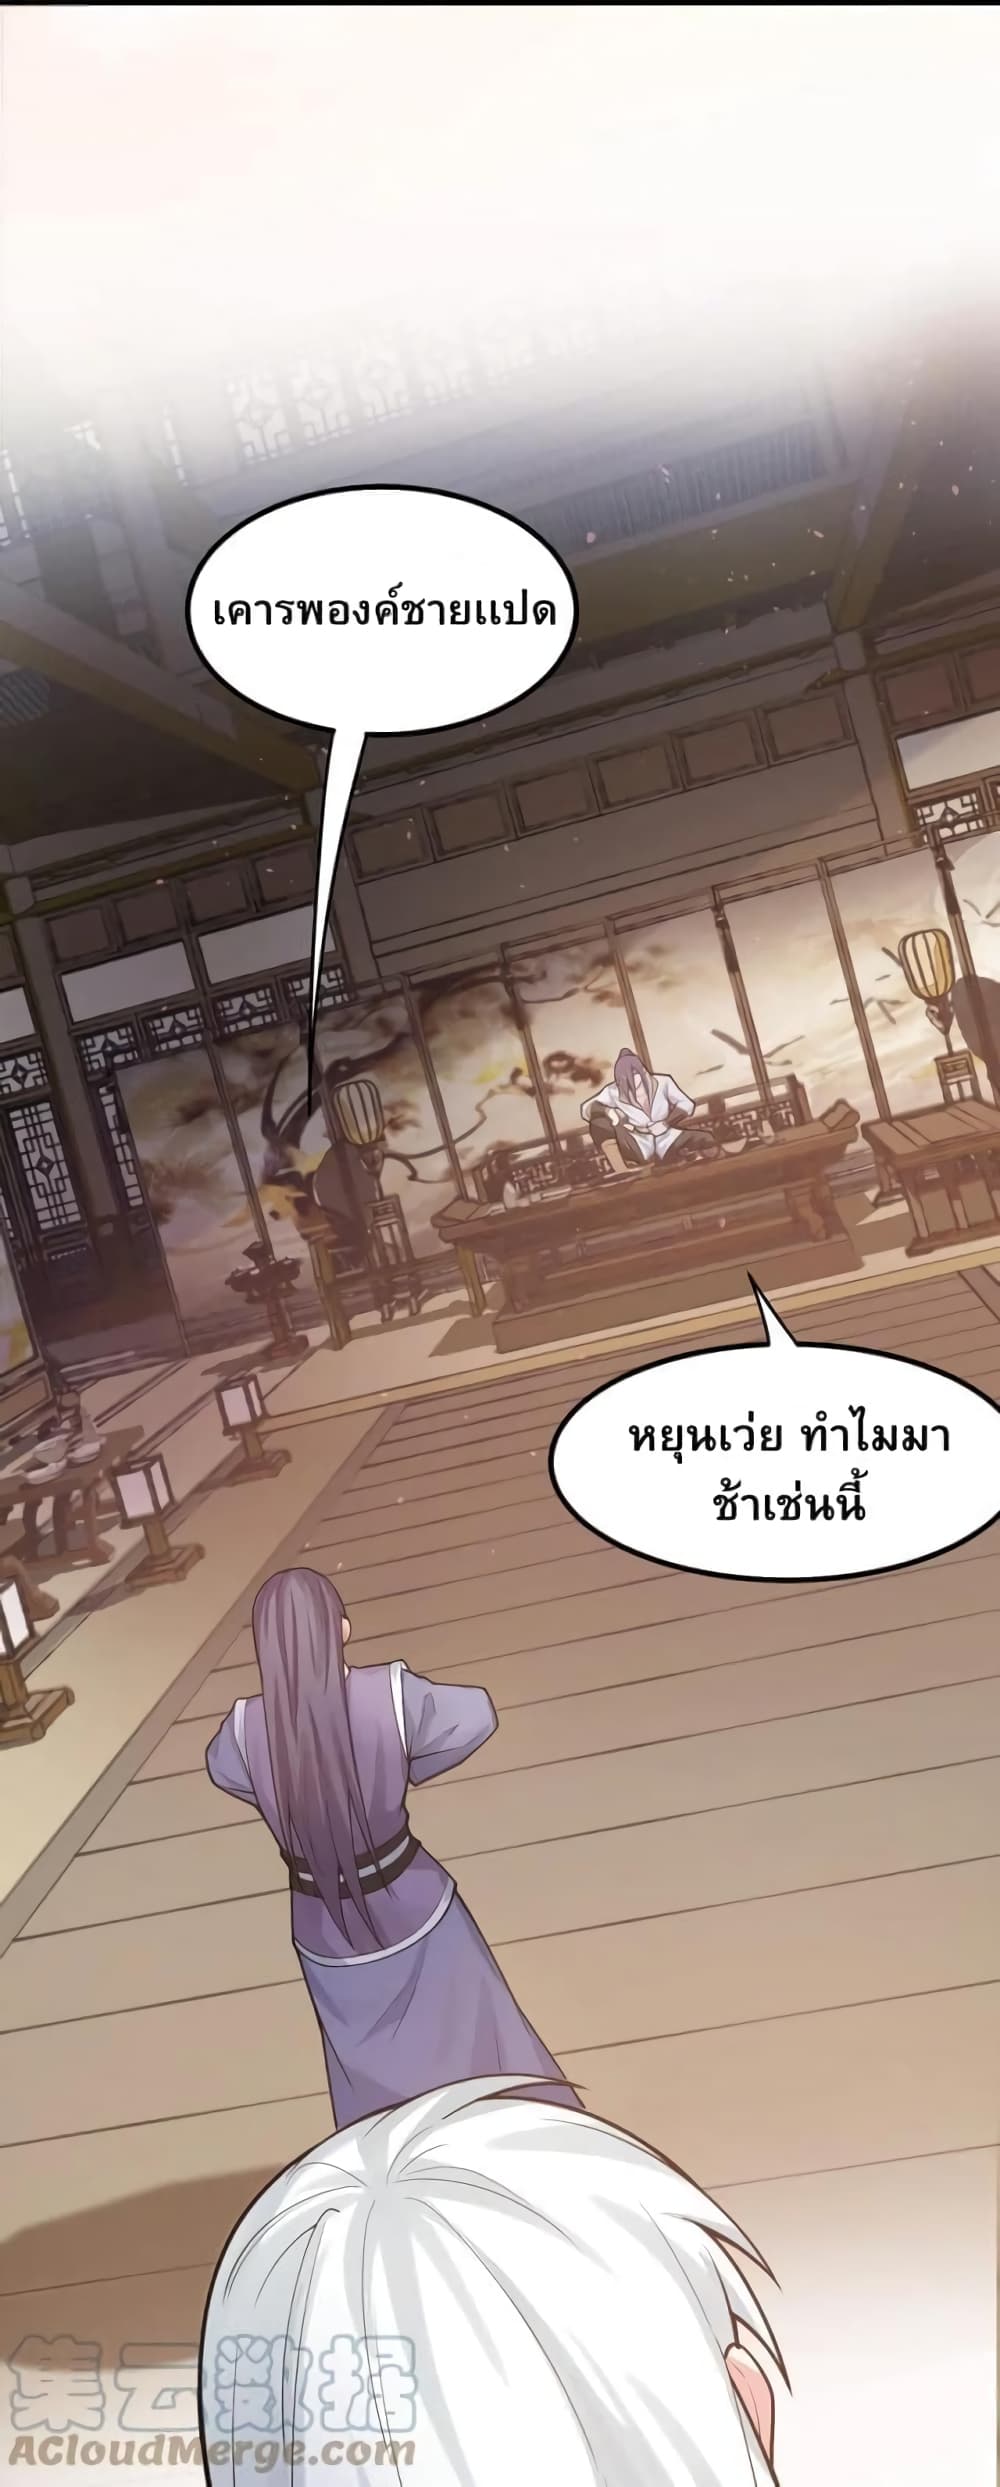 Godsian Masian from Another World ตอนที่ 104 (16)